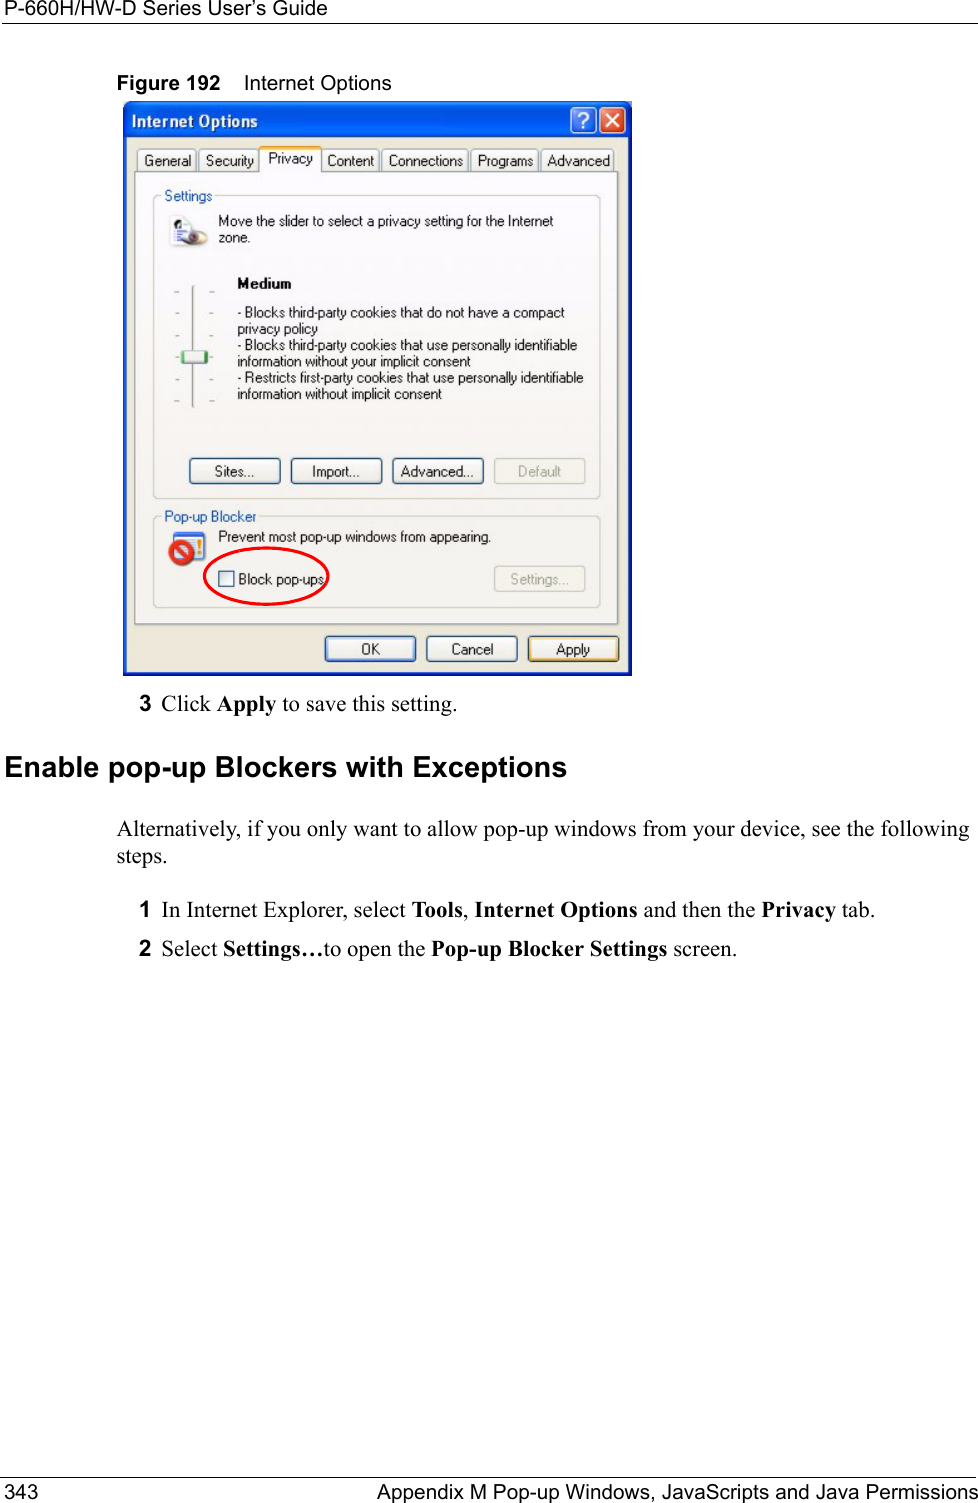 P-660H/HW-D Series User’s Guide343 Appendix M Pop-up Windows, JavaScripts and Java PermissionsFigure 192    Internet Options3Click Apply to save this setting.Enable pop-up Blockers with ExceptionsAlternatively, if you only want to allow pop-up windows from your device, see the following steps.1In Internet Explorer, select Too ls , Internet Options and then the Privacy tab. 2Select Settings…to open the Pop-up Blocker Settings screen.